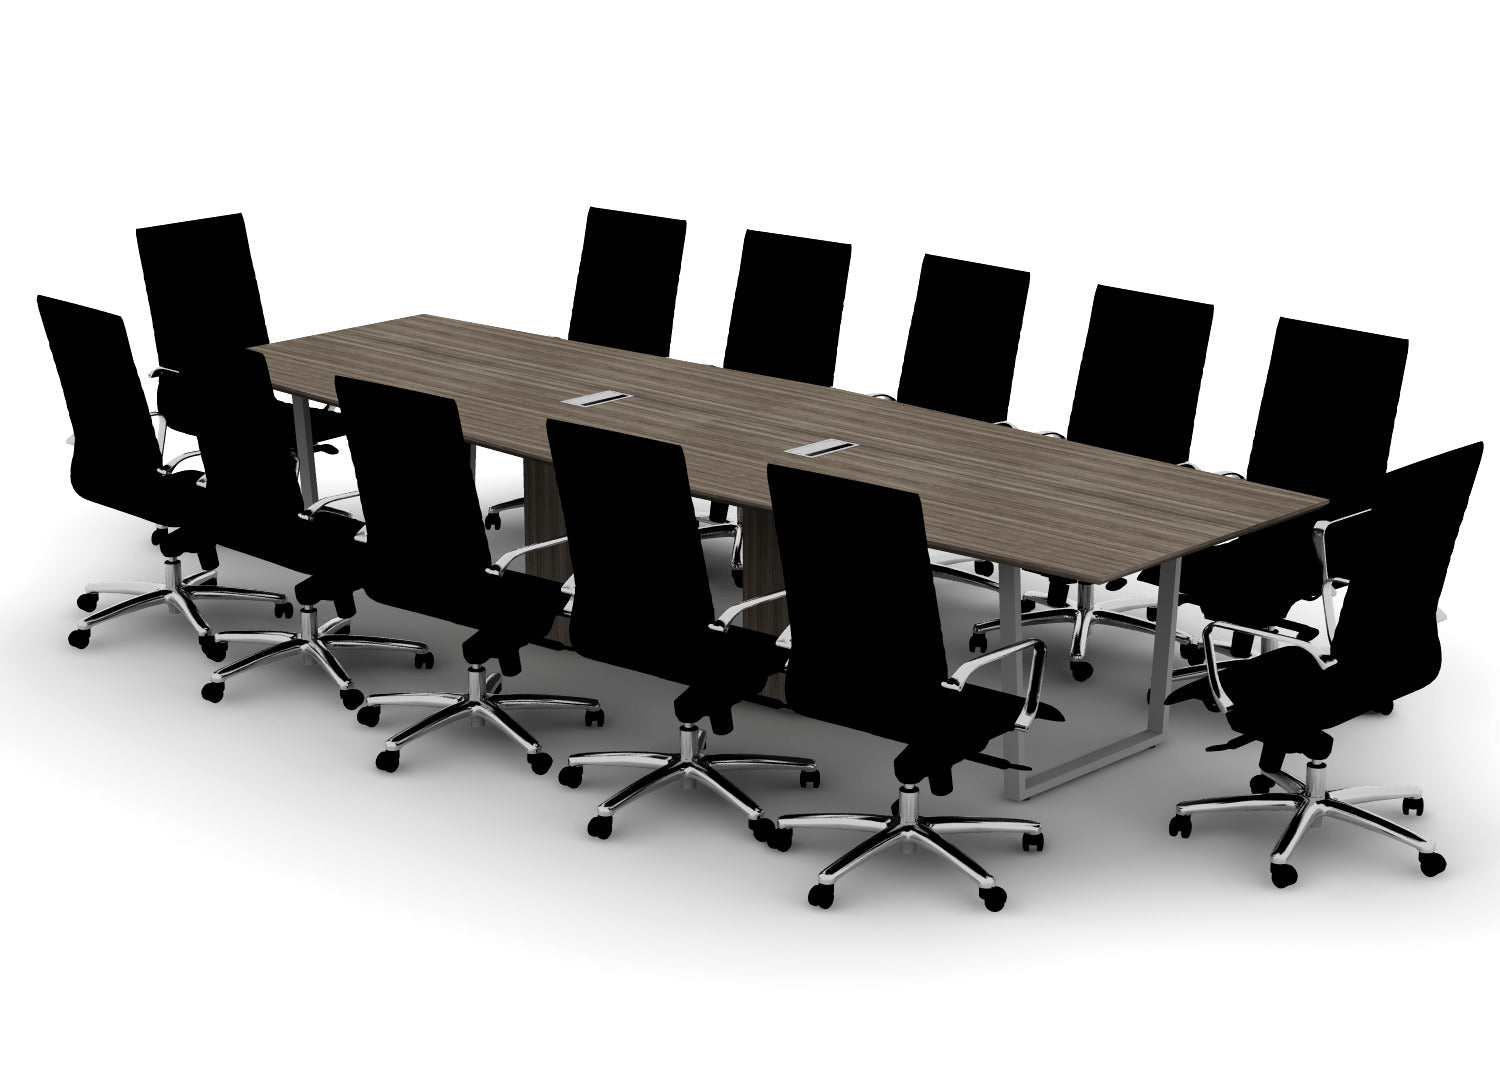 48" x 144" Conference Room (Seats 12)